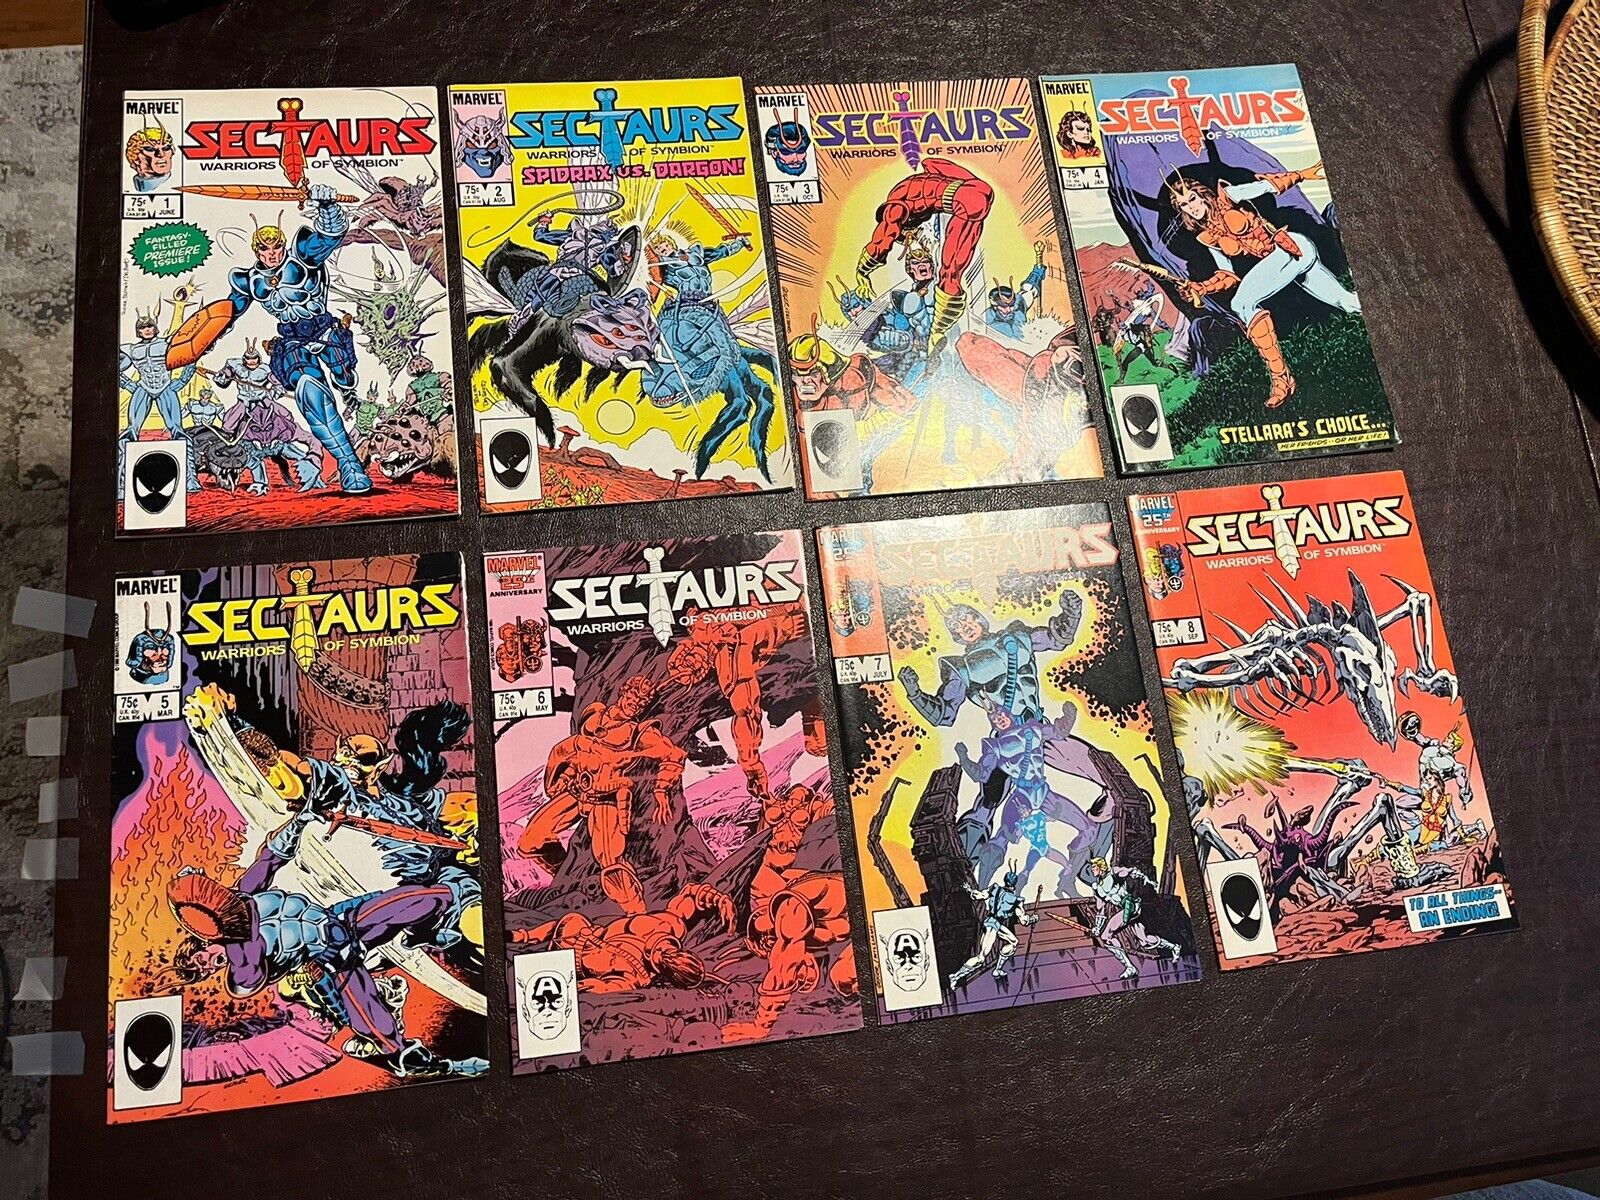 Sectaurs Warriors Of Symbion #1-8 Comic Complete Set Marvel 1985 1 2 3 4 5 6 7 8